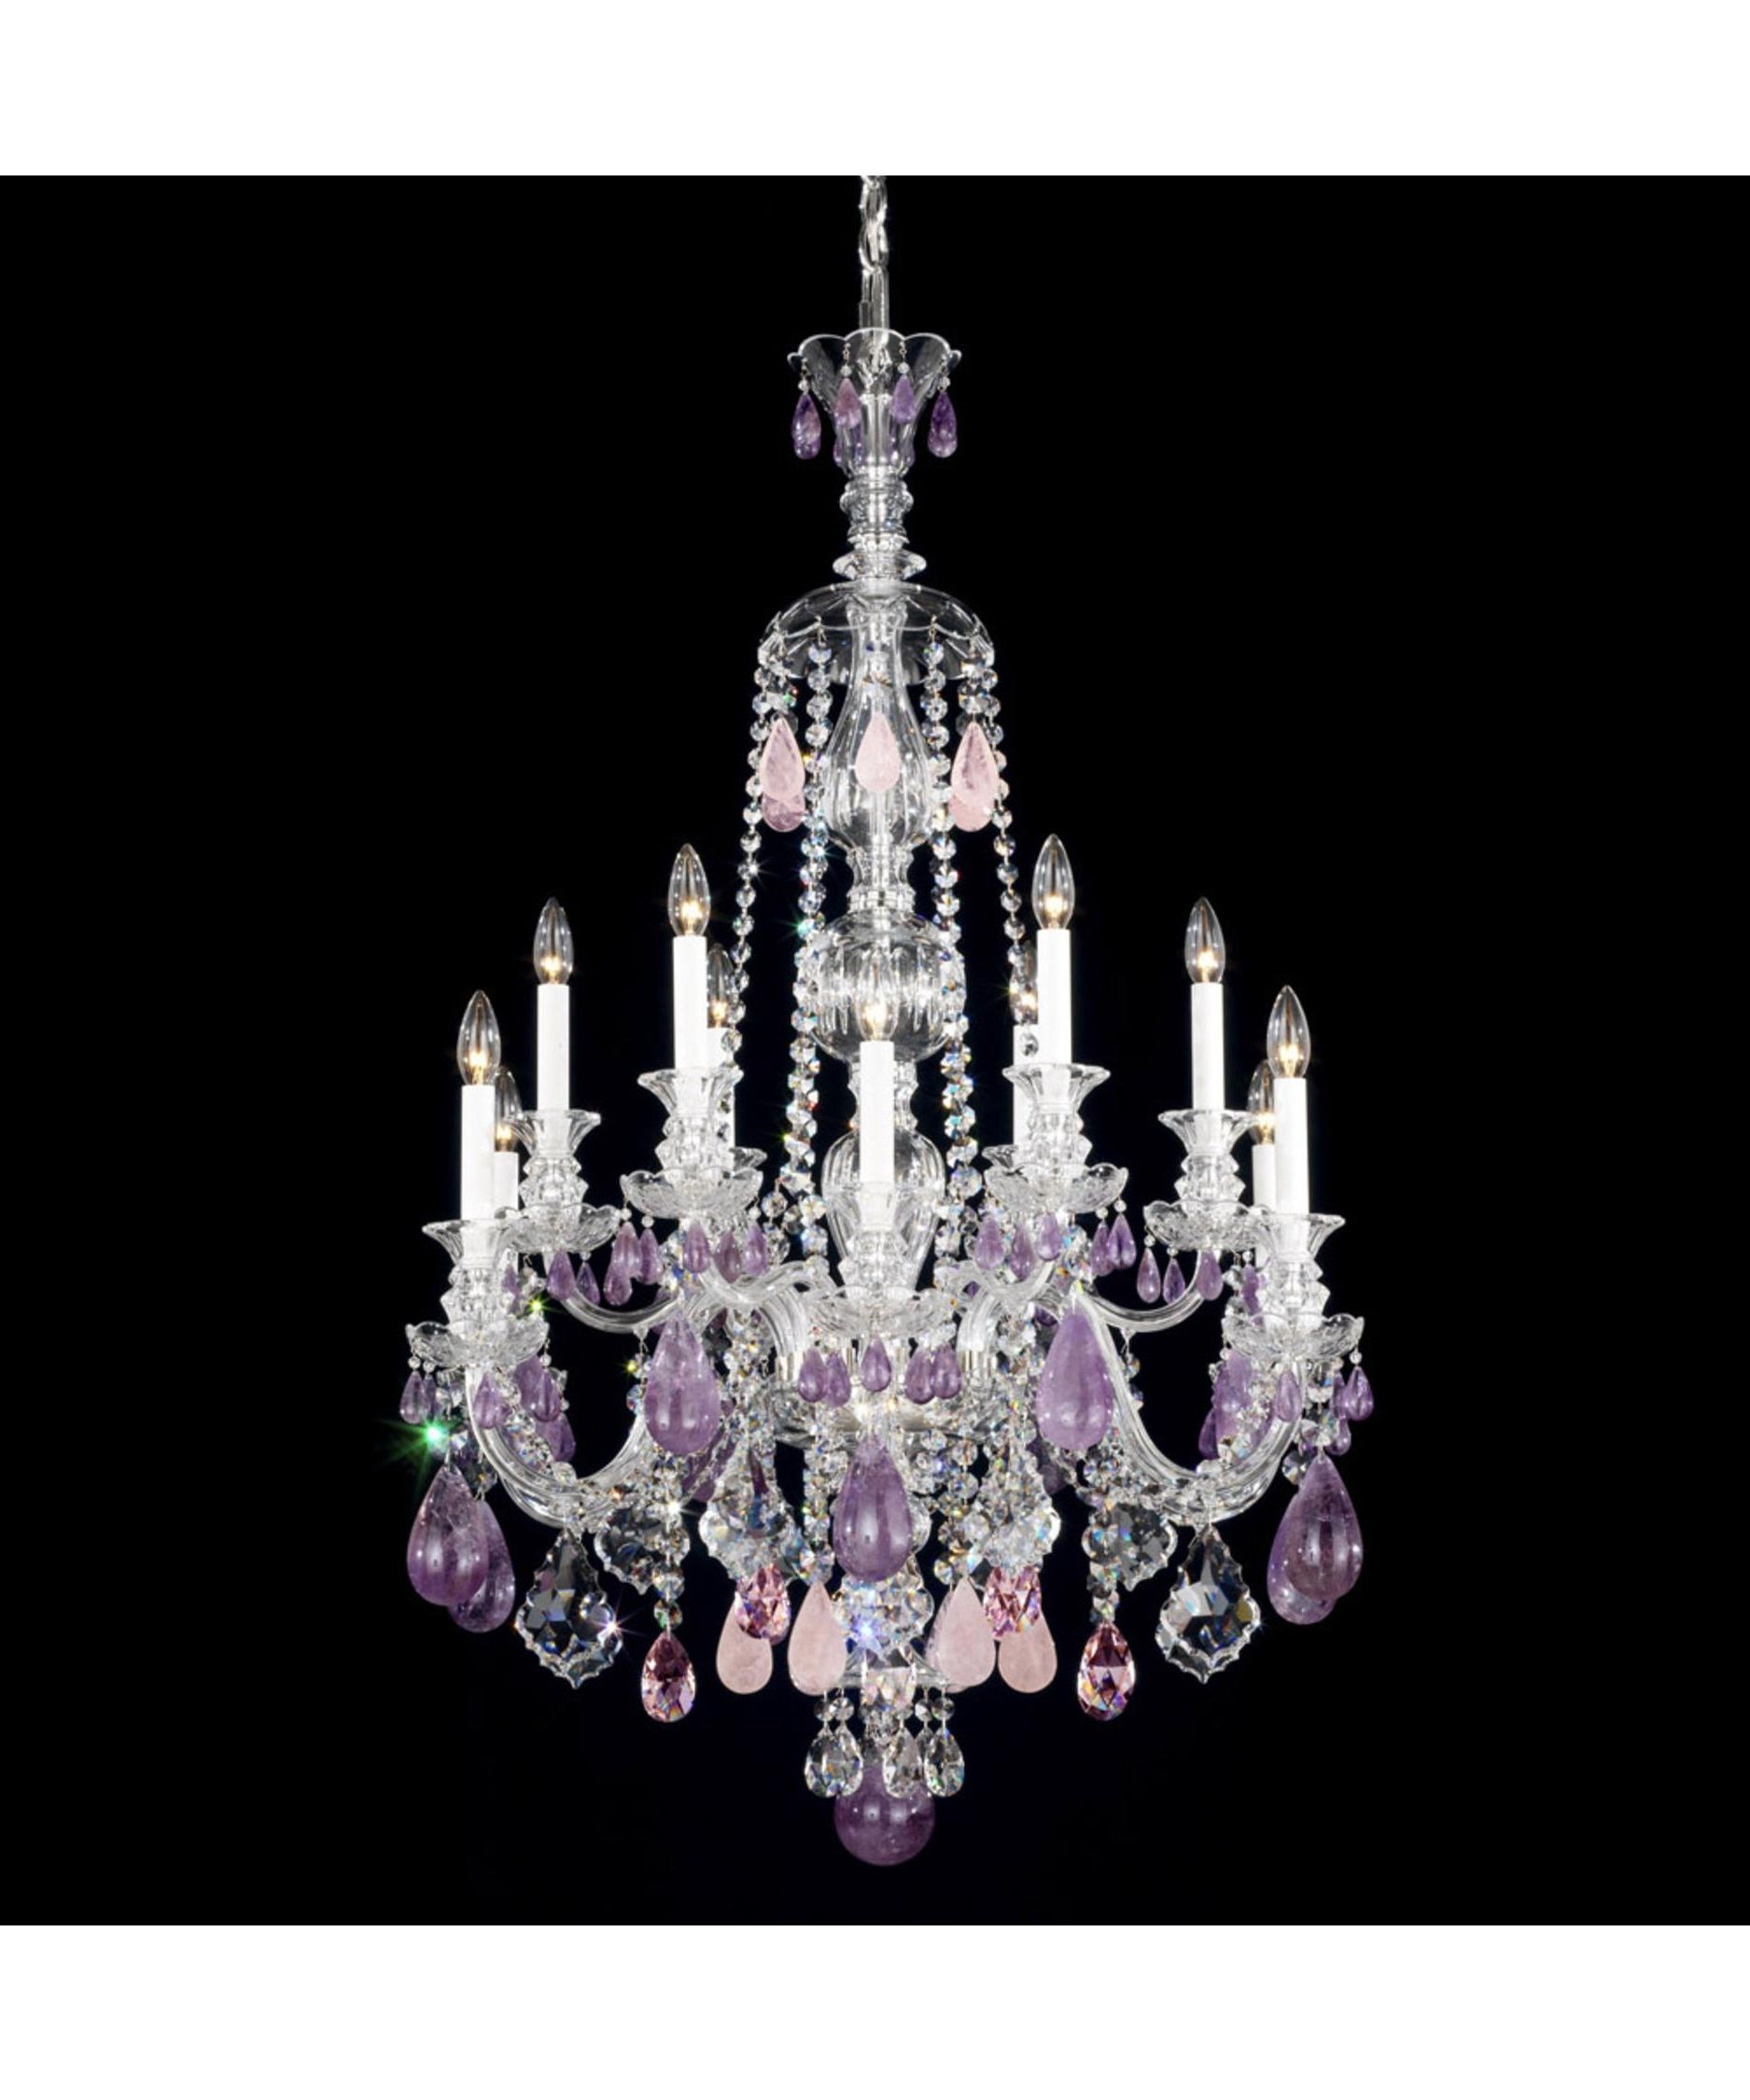 Purple Crystal Chandeliers Intended For Most Recent Schonbek 5508 Hamilton Rock Crystal 30 Inch Wide 12 Light Chandelier (View 1 of 15)